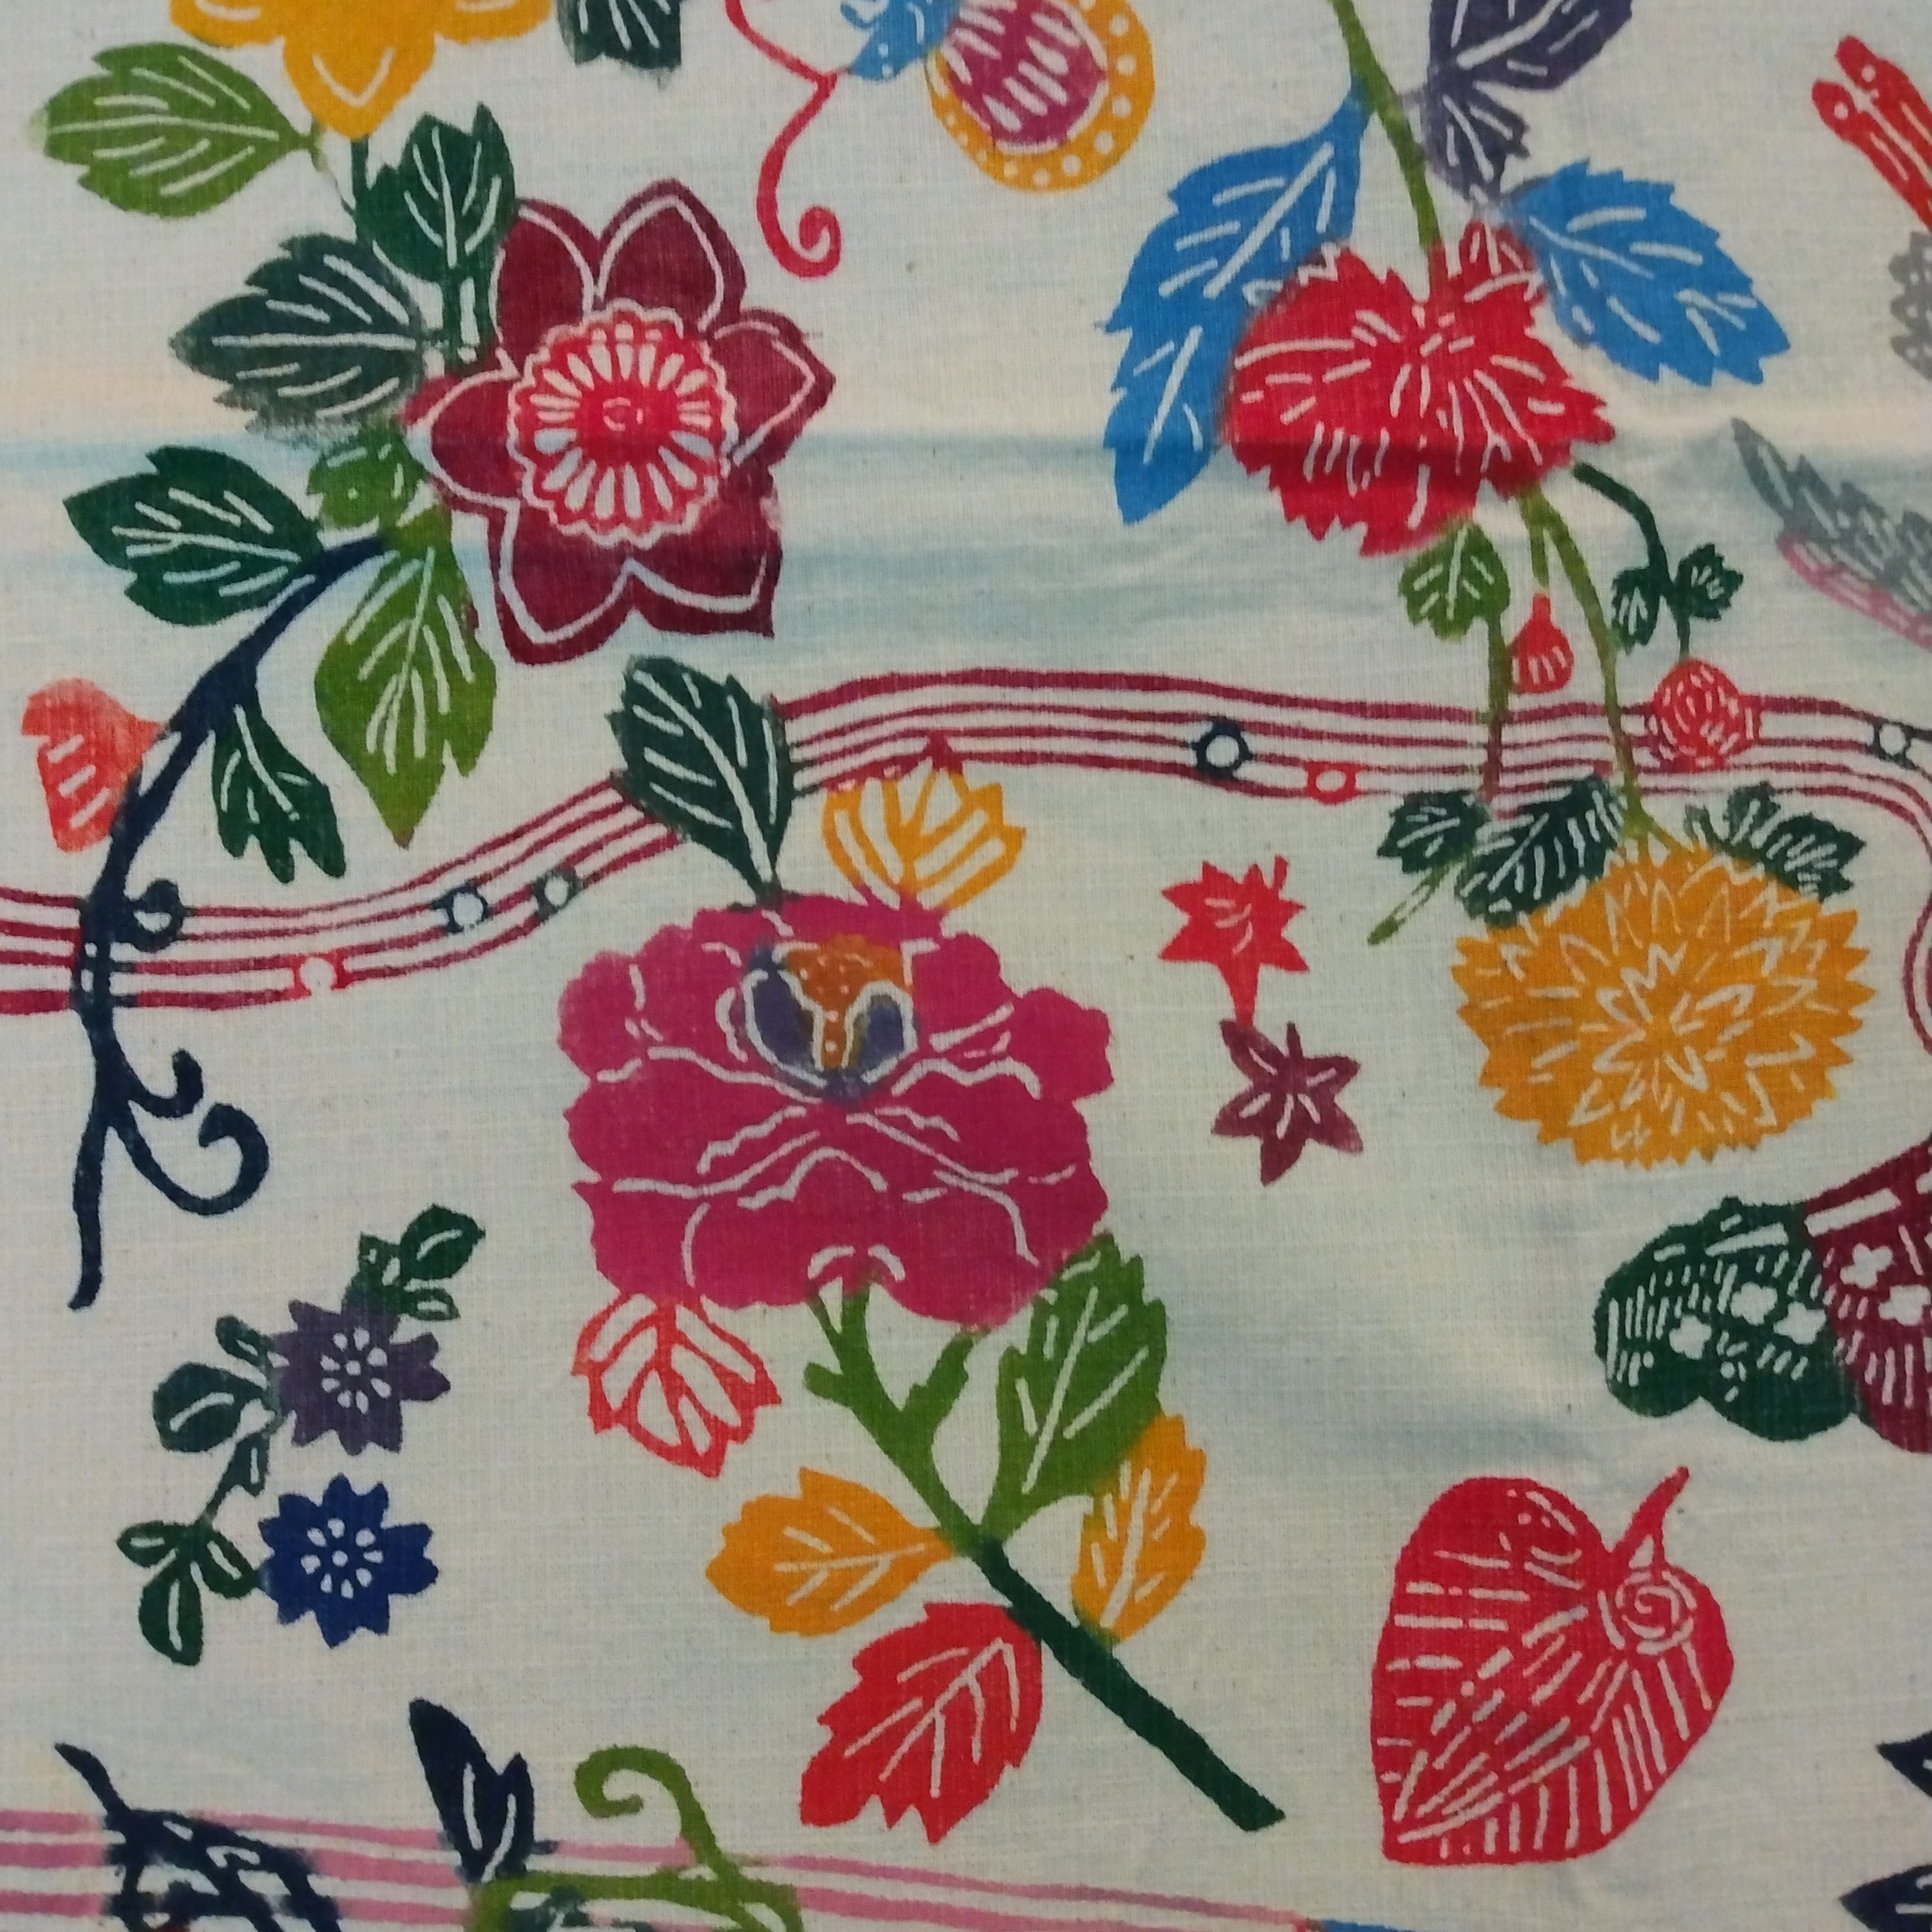 Okinawa Bingata Dyed Cloth with Flora and Fauna. Vintage Japanese Textile; Thiel Collection